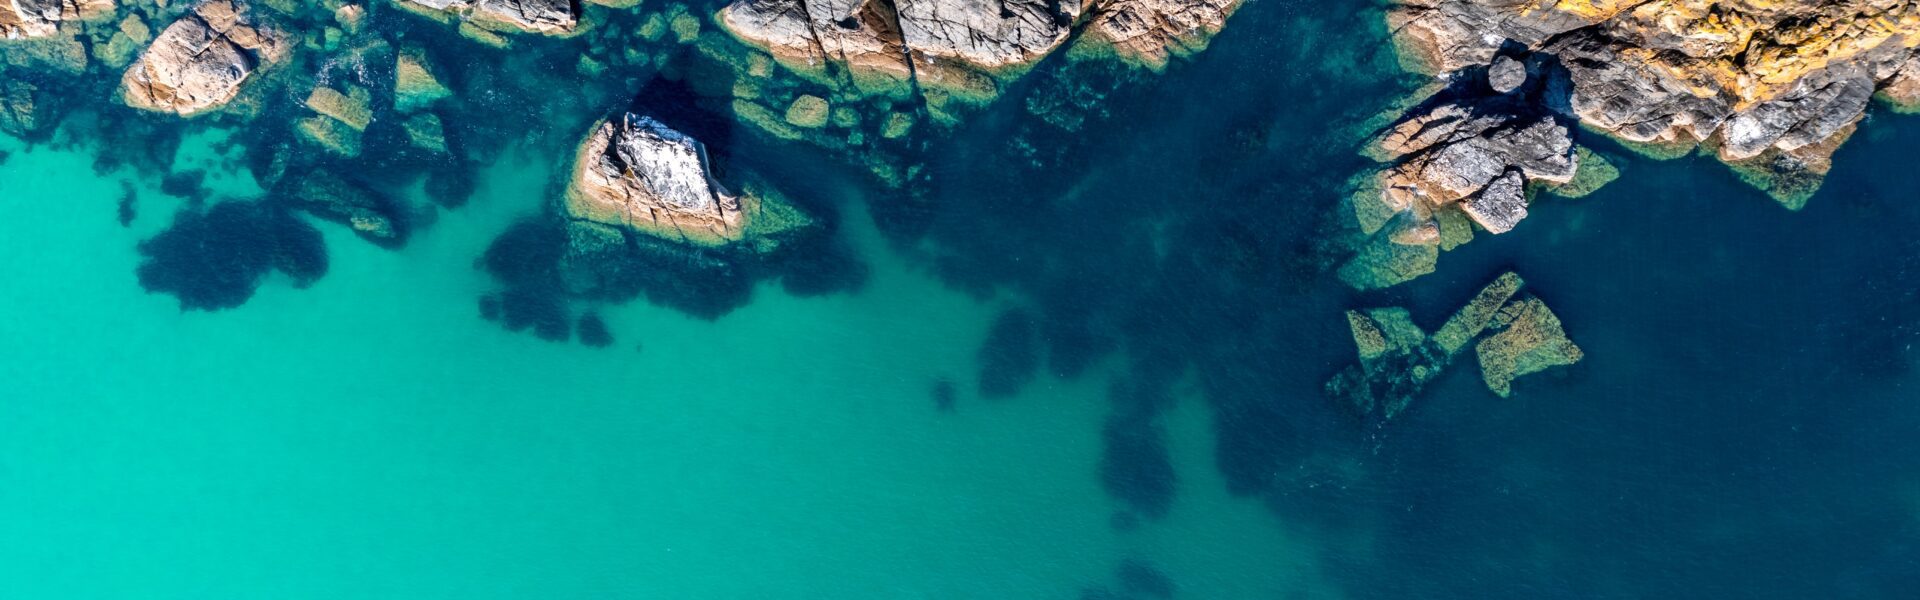 Rocks and water, Ariel view